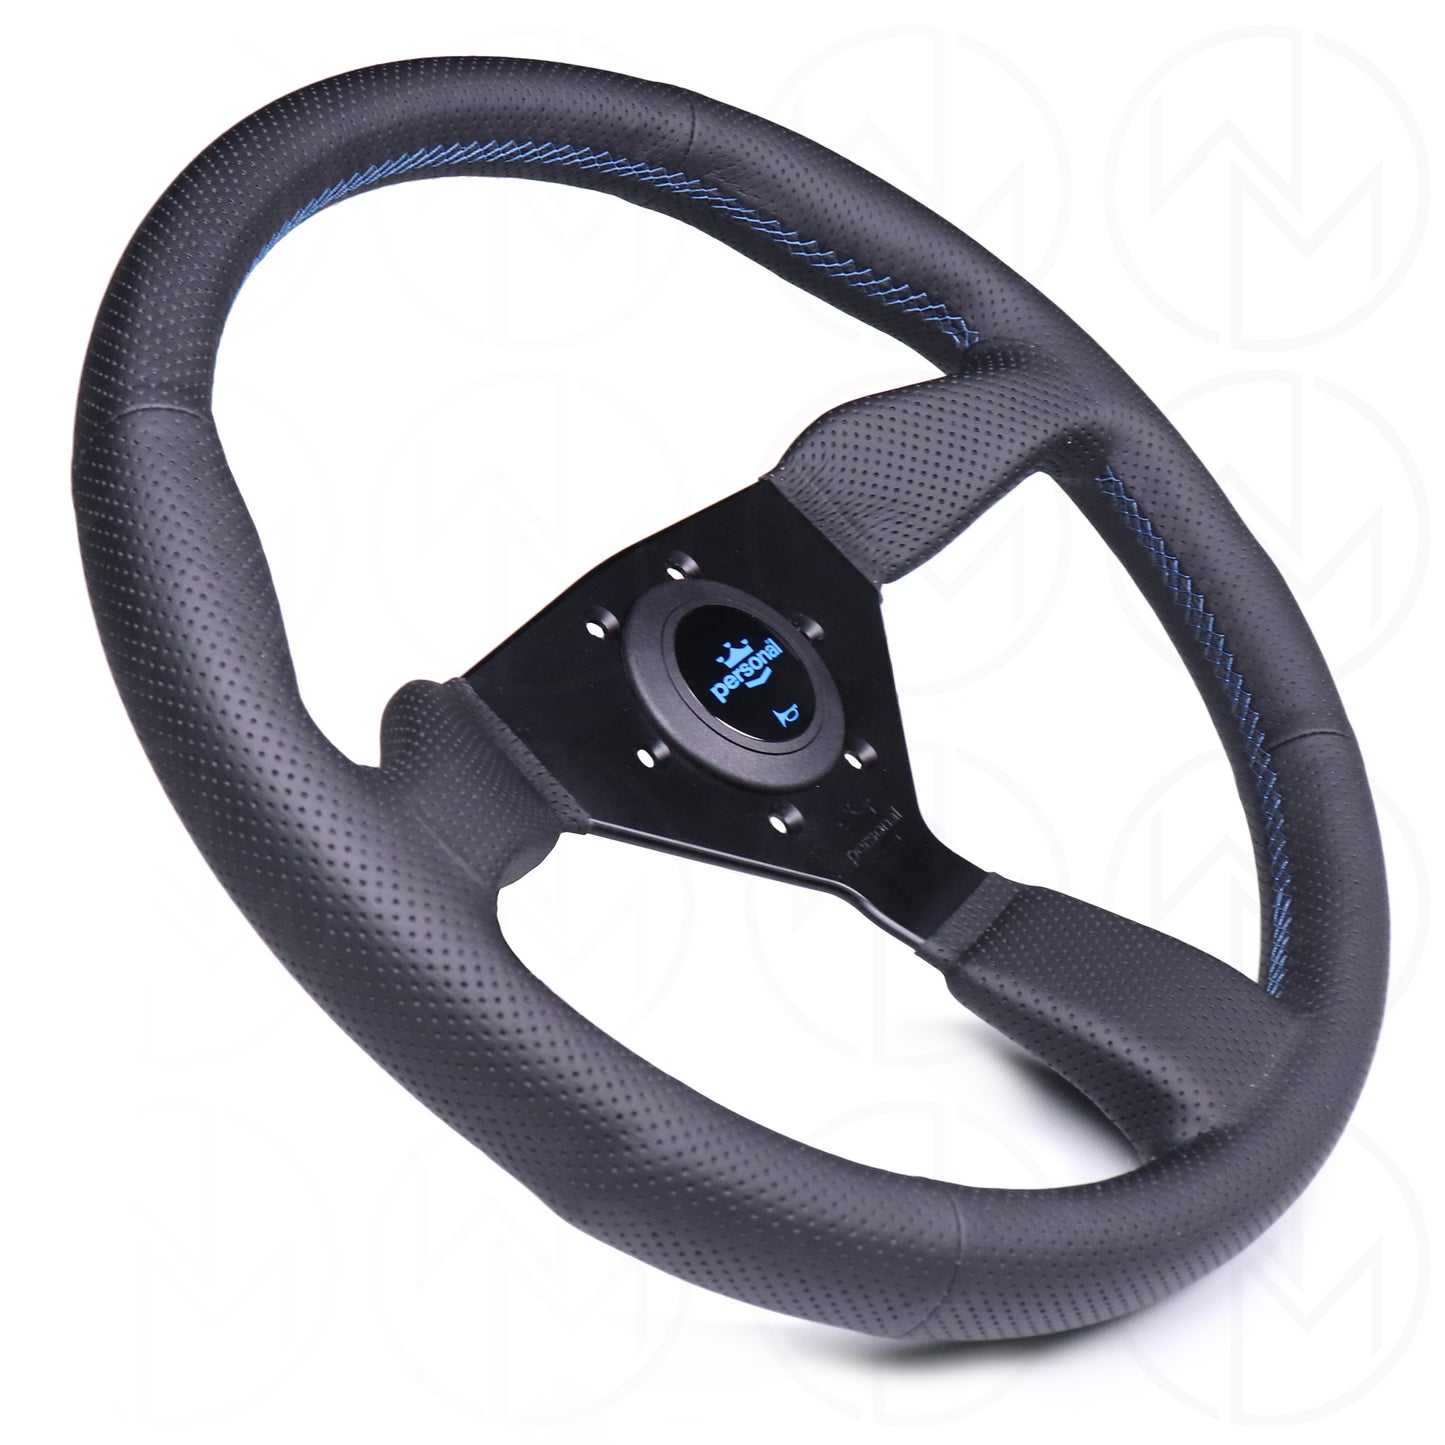 Personal Grinta Steering Wheel - 330mm Perforated Leather w/Blue Stitch